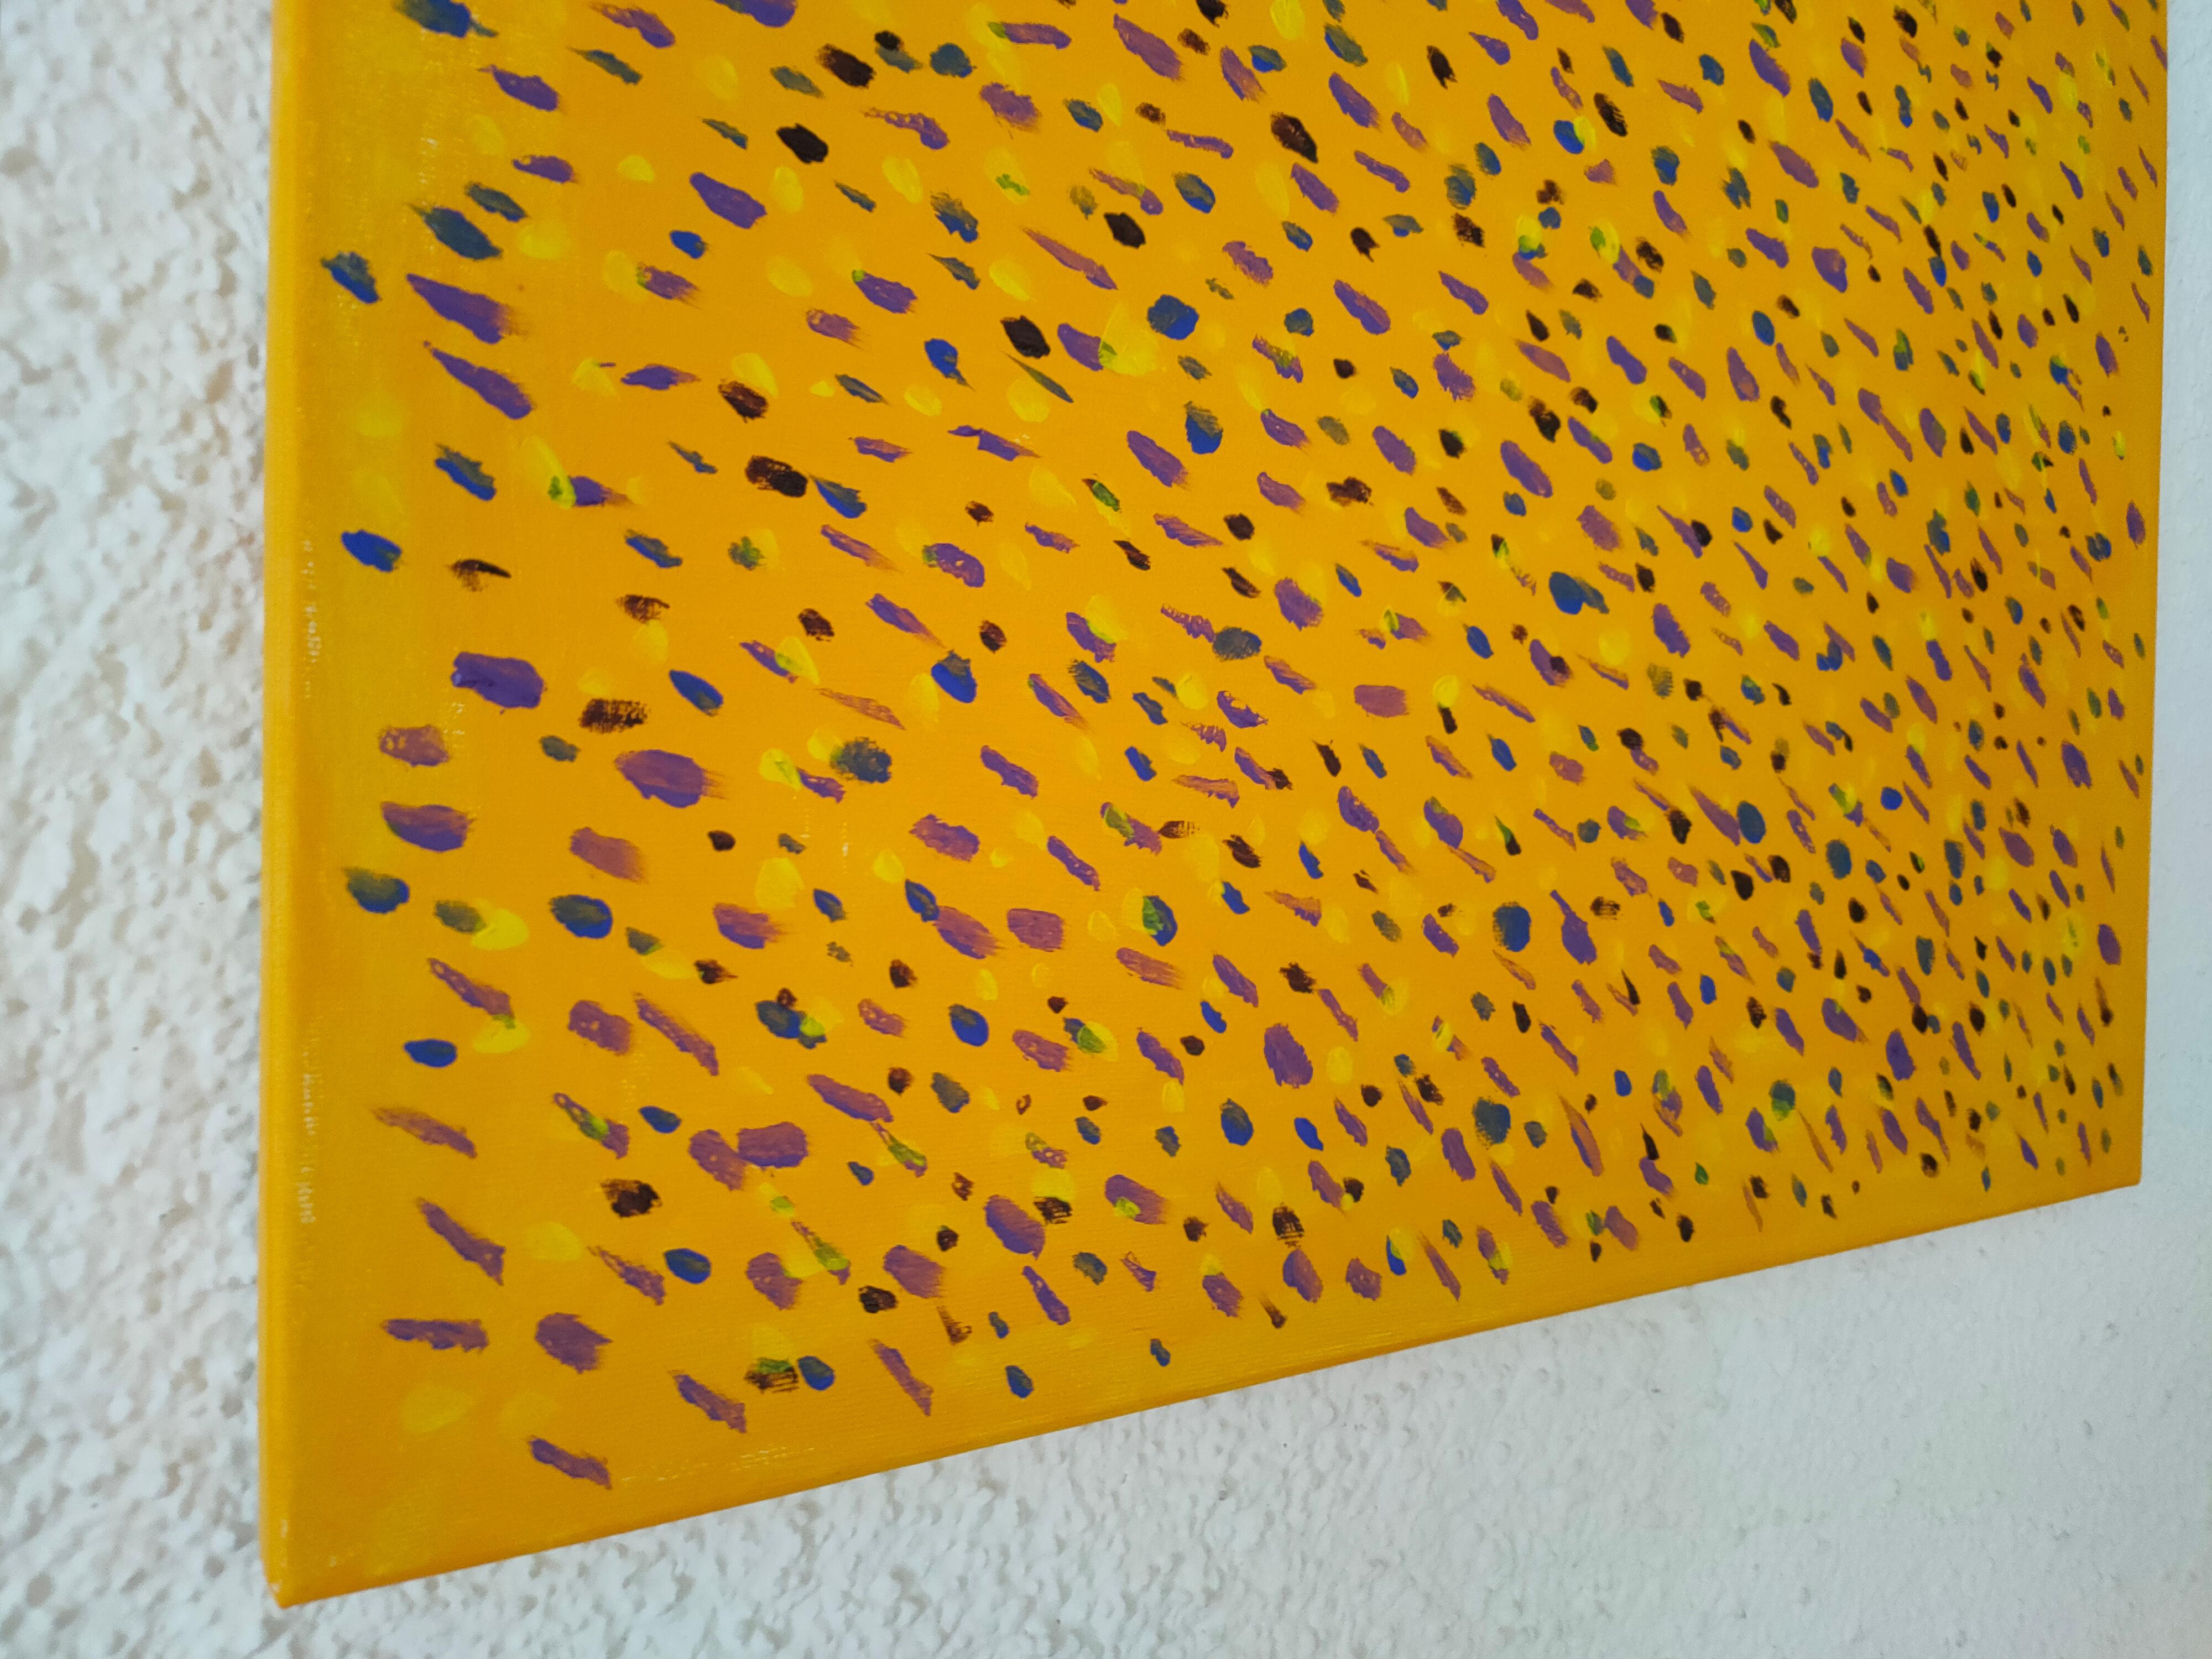 The Beauty of Chaos 02 from the Chaos Theory Collection Interior Painting - Yellow Abstract Painting by Anastasia Vasilyeva